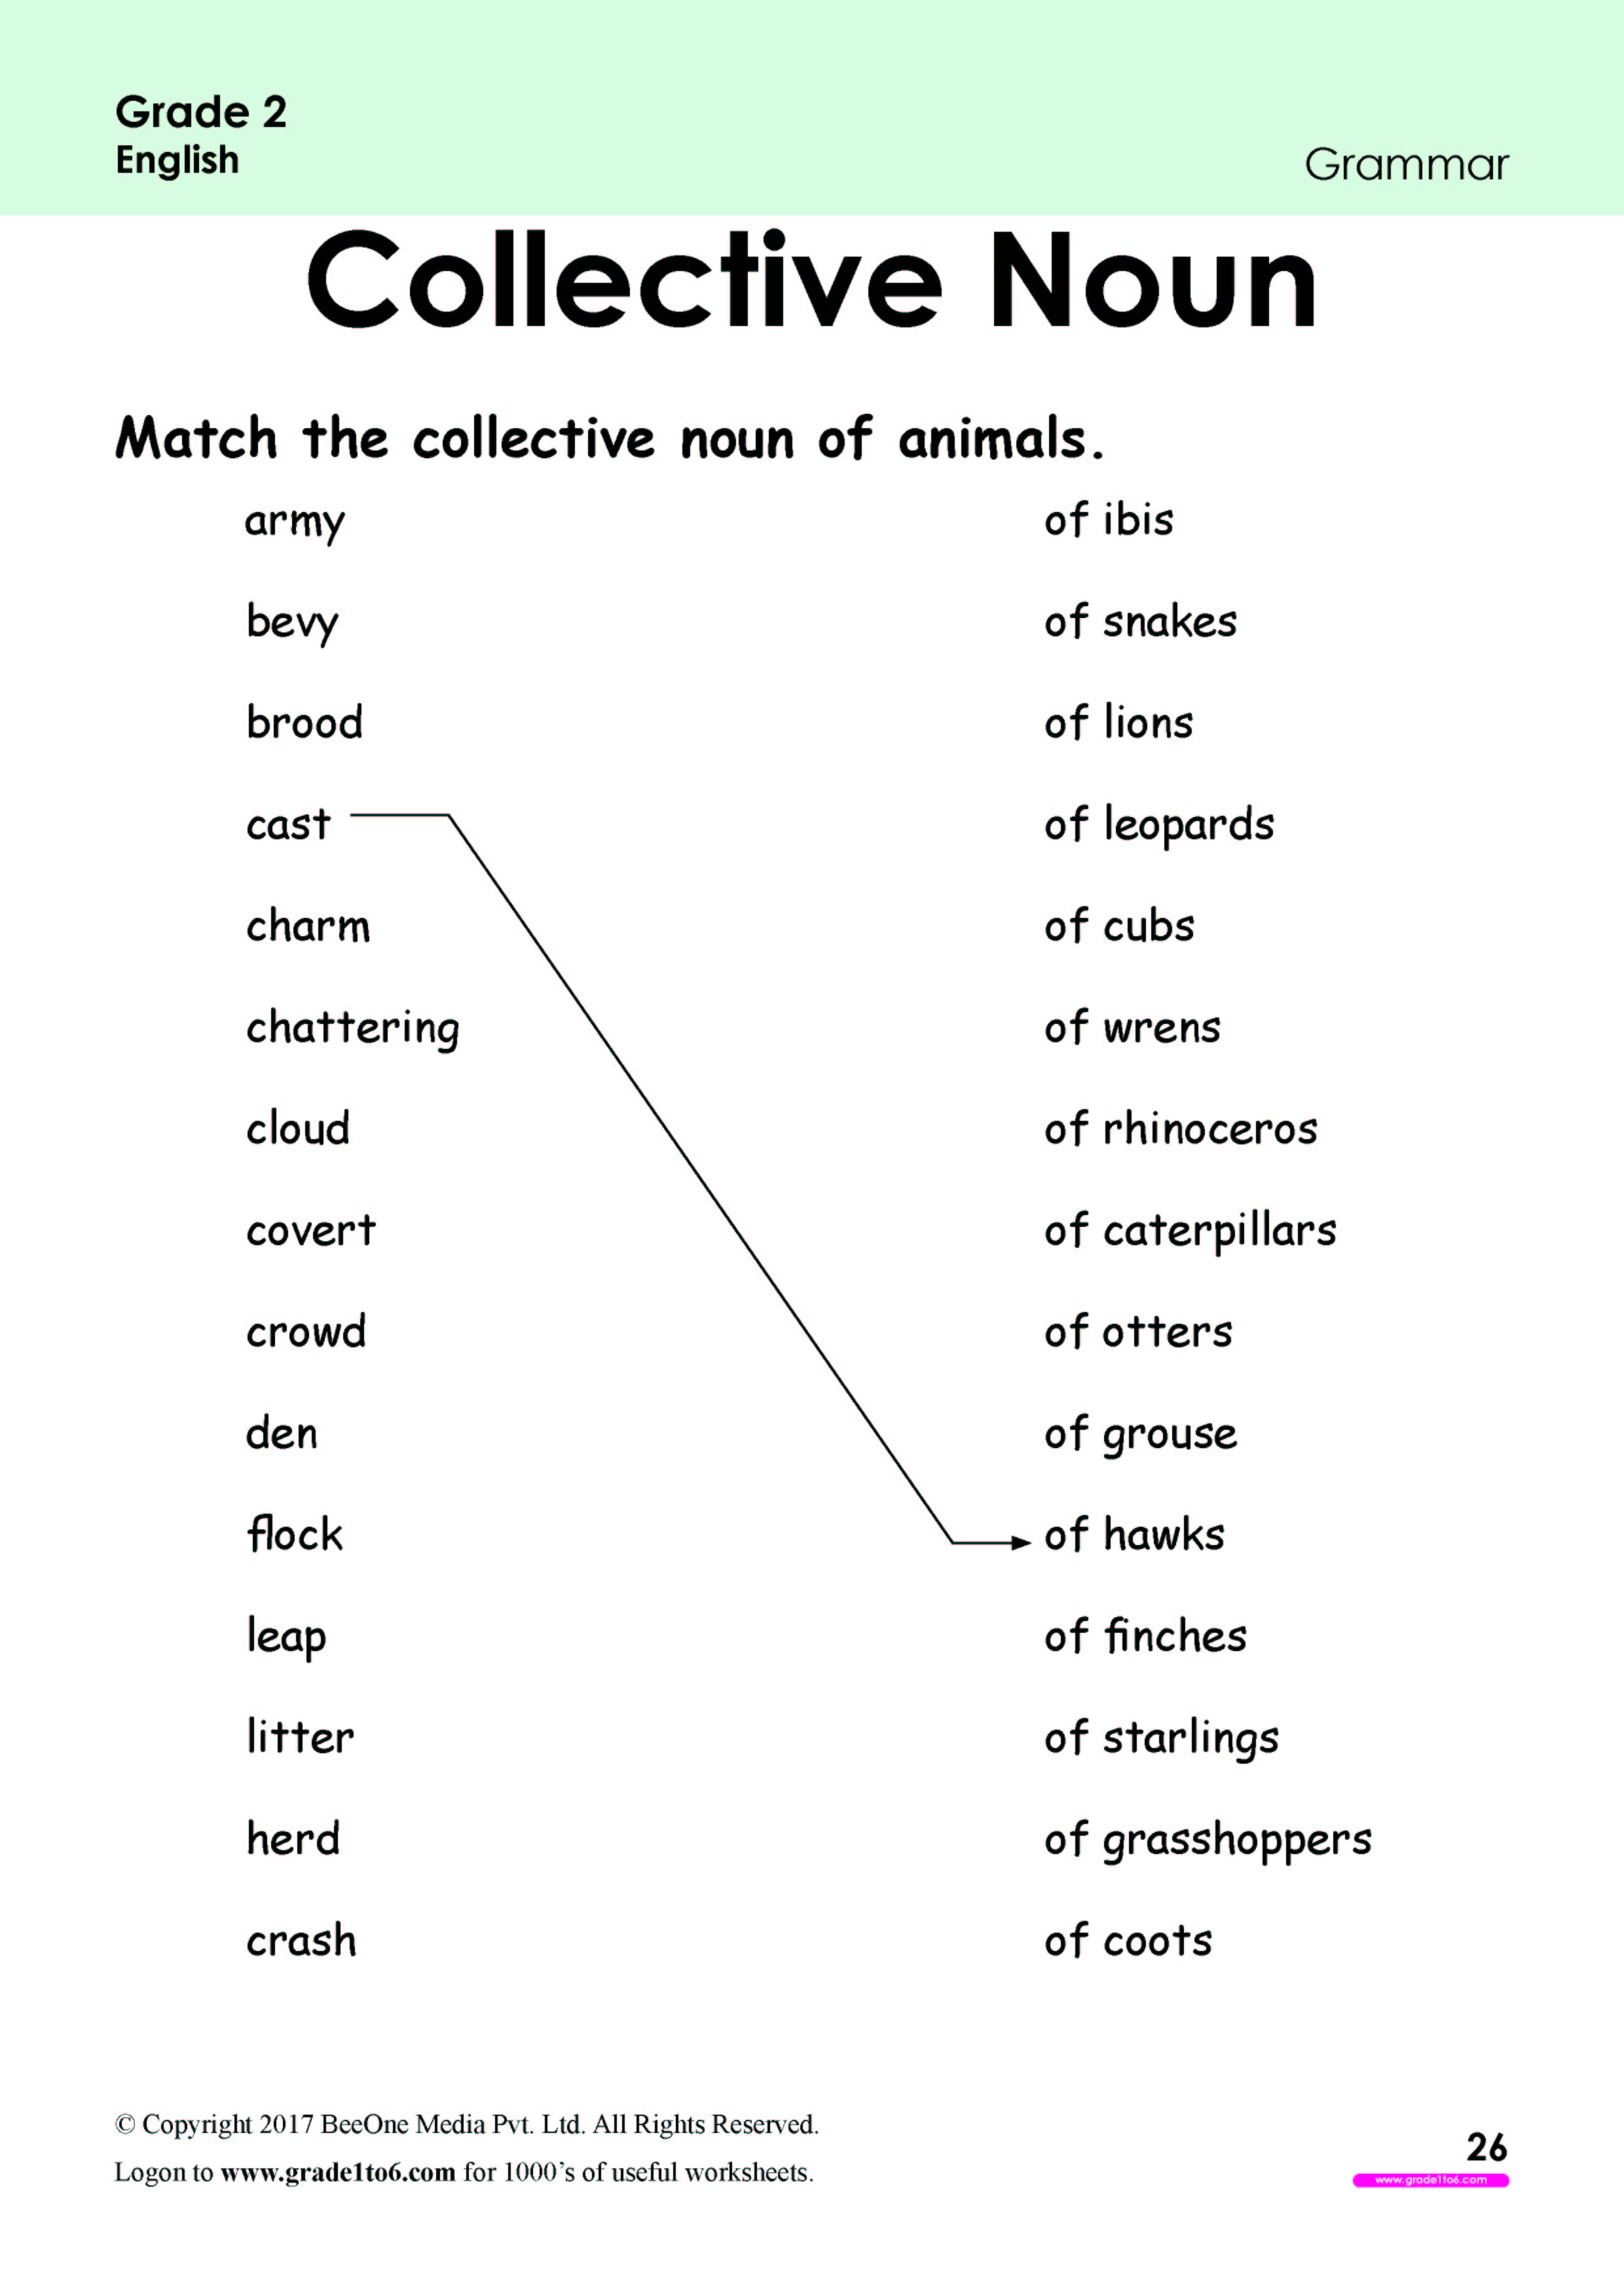 collective-noun-of-animals-worksheets-www-grade1to6